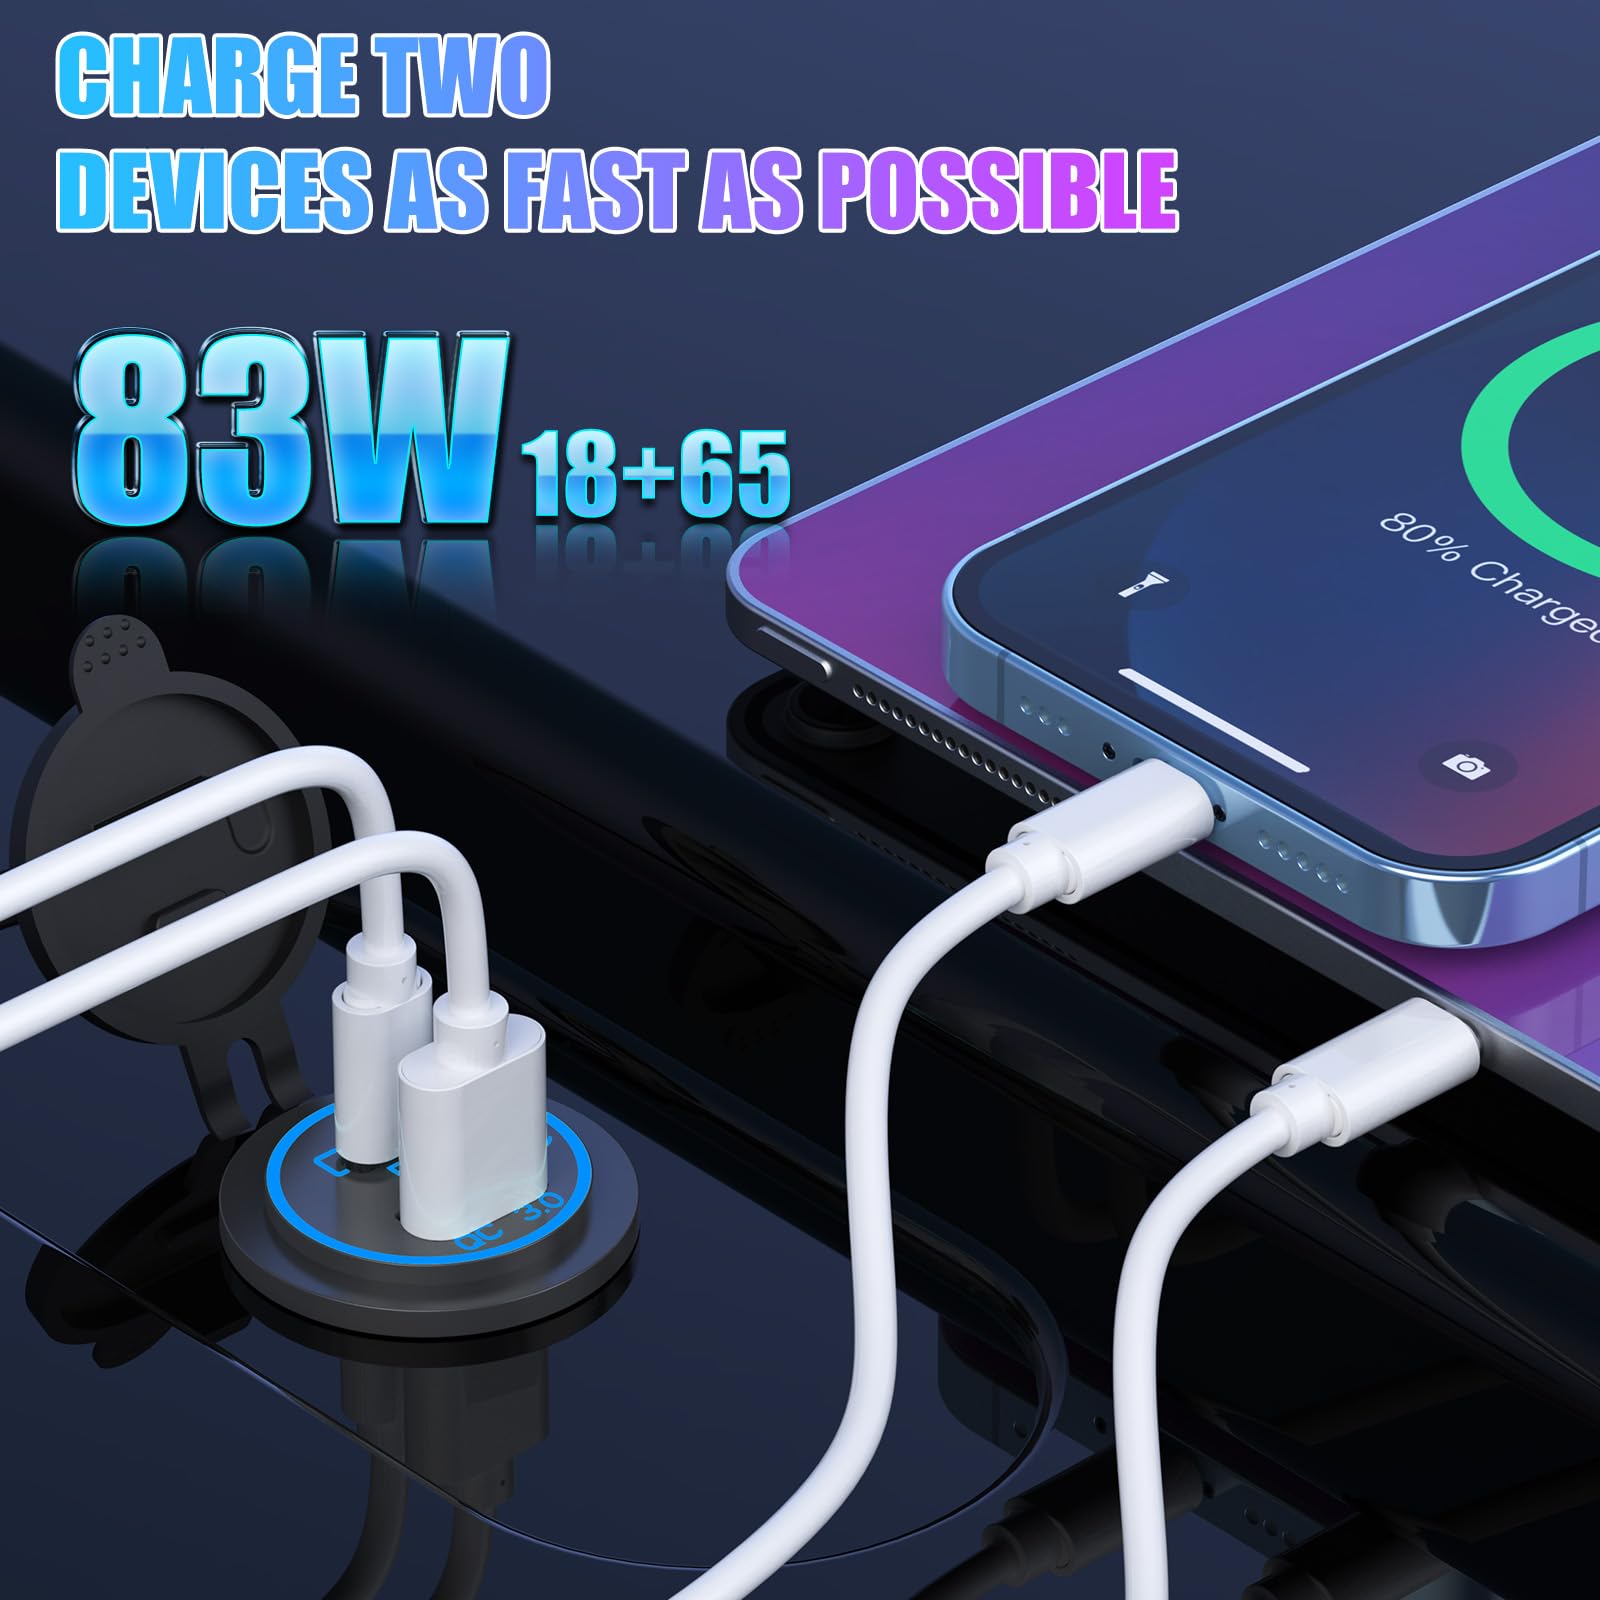 Boostable 12V USB C Outlet 65W PD3.0 Port and 18W Quick Charge 3.0 Car USB Charger Socket for Laptops Tablets Phones, Waterproof 12V/24V Socket with Power Switch for Car Marine Boat Motorcycle RV